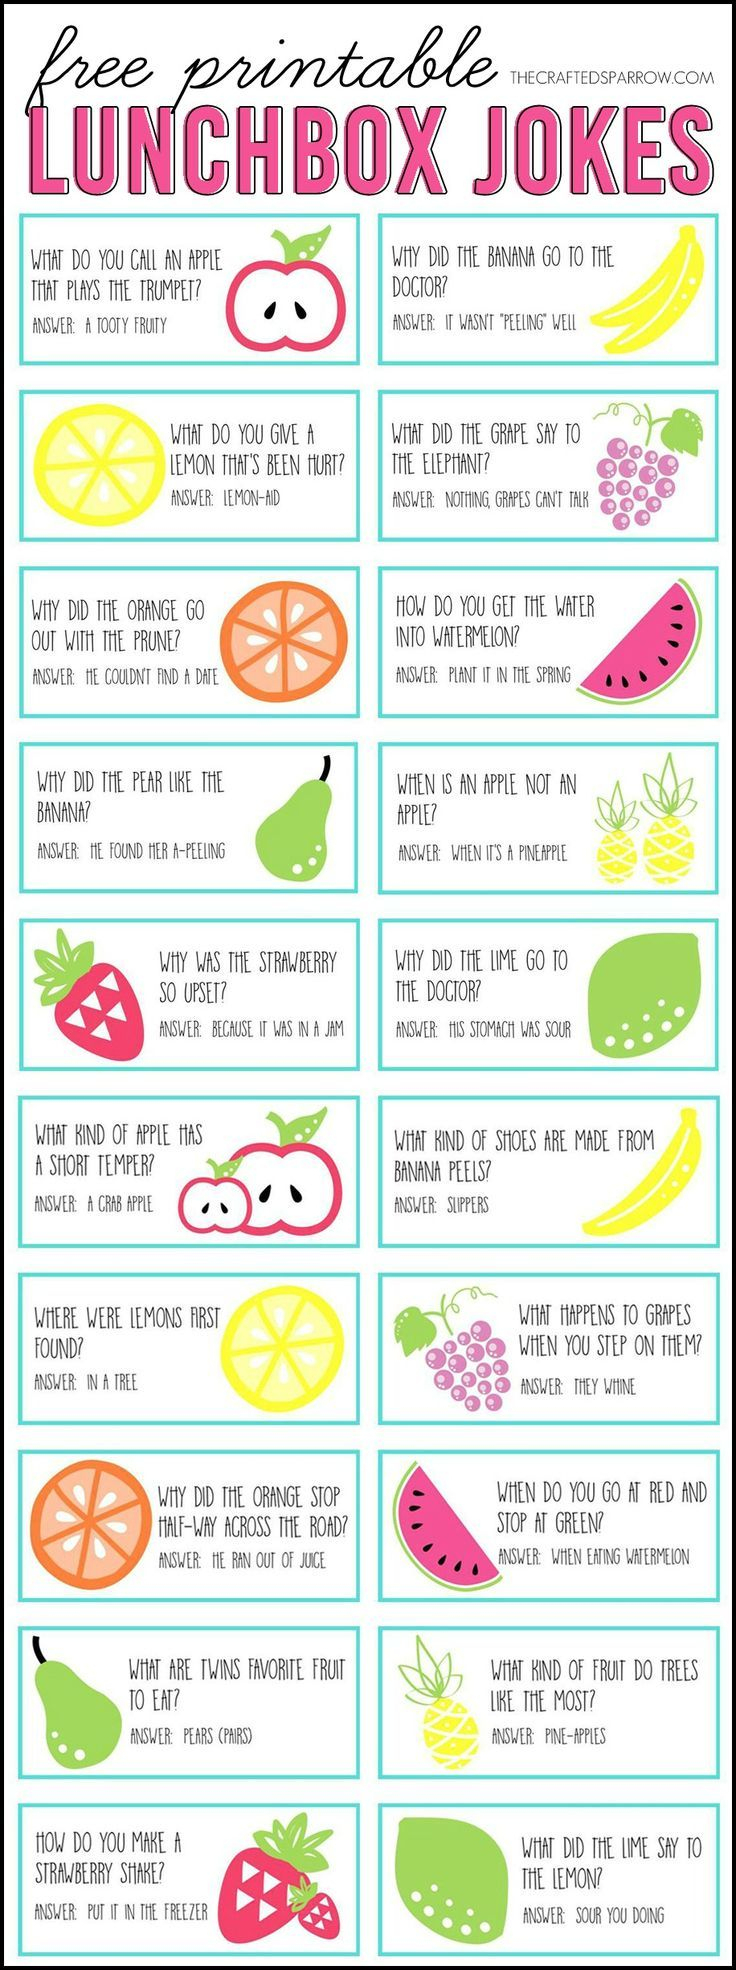 Free Printable Lunchbox Notes | Help For Packing School Lunches - Free Printable Lunchbox Notes